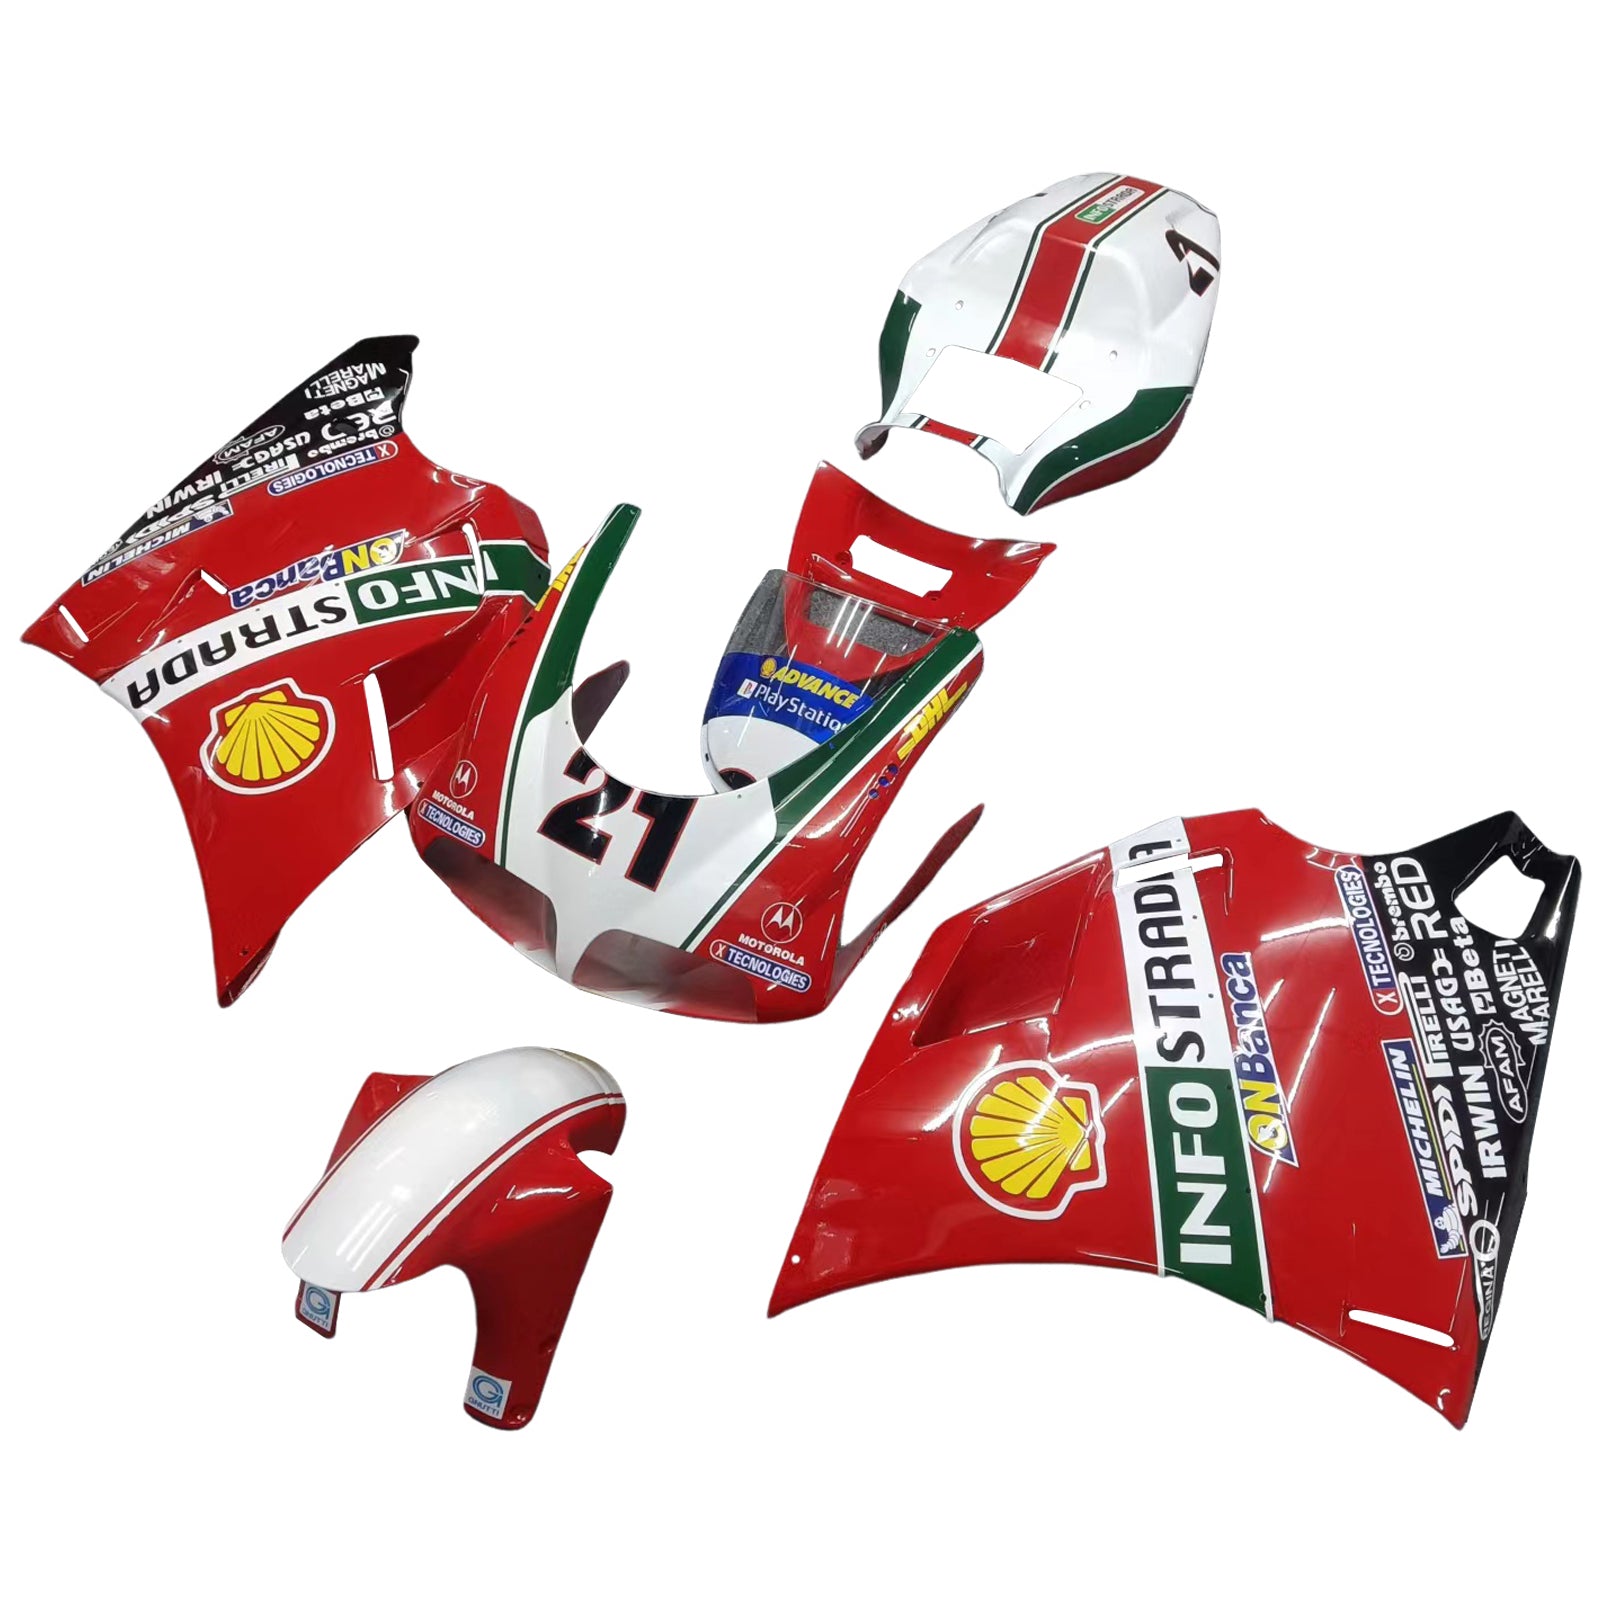 Amotopart Ducati 996 748 1996-2002 Red with Logos Fairing Kit